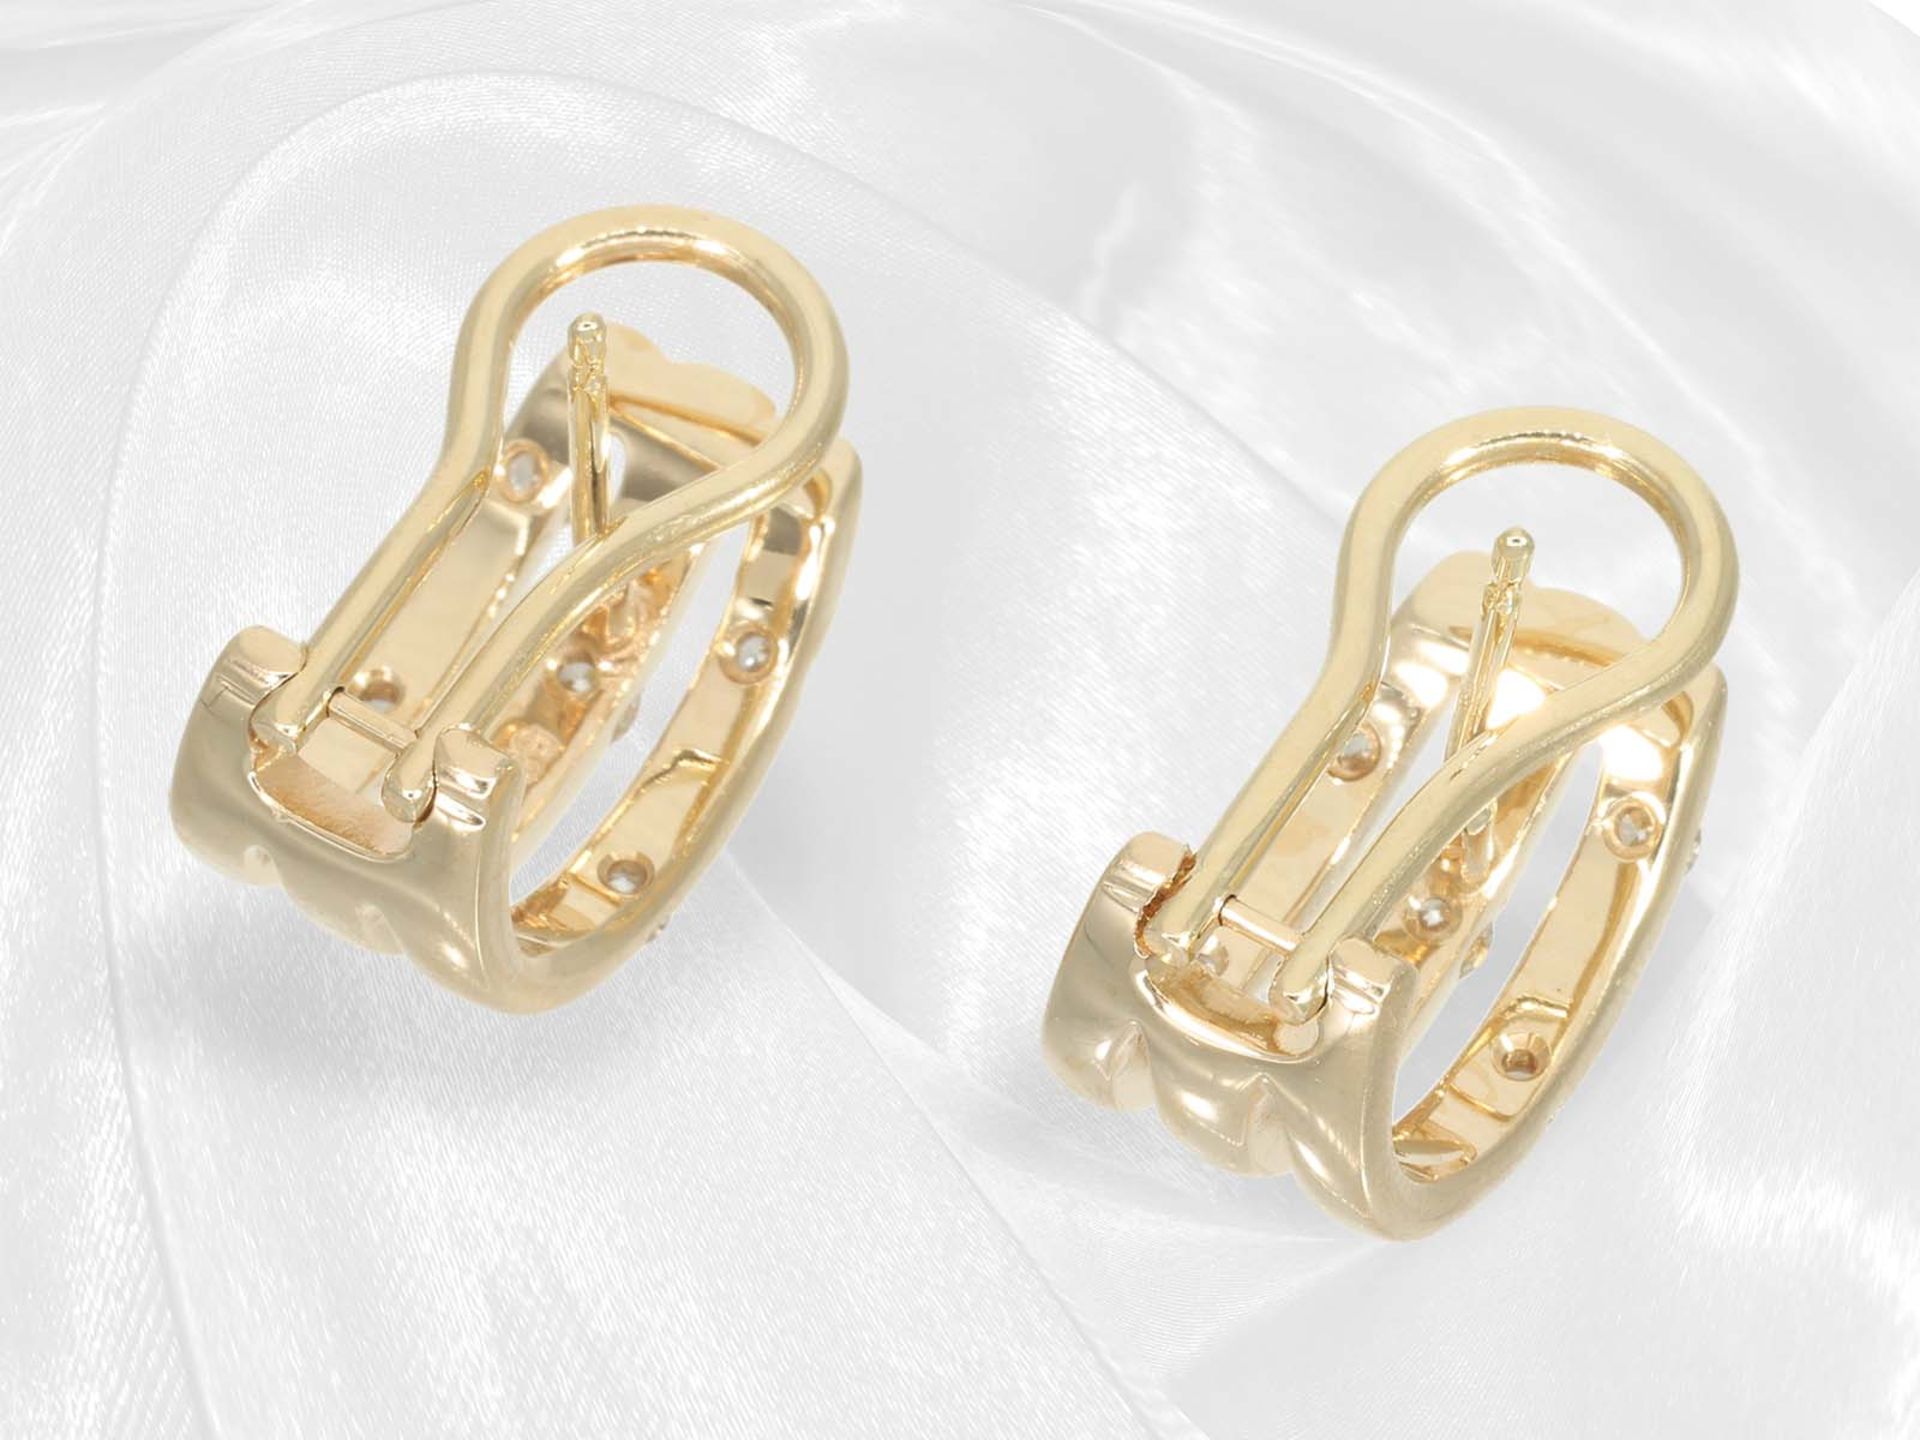 Fine gold brilliant-cut diamond earrings by the brand Christ - Image 3 of 3